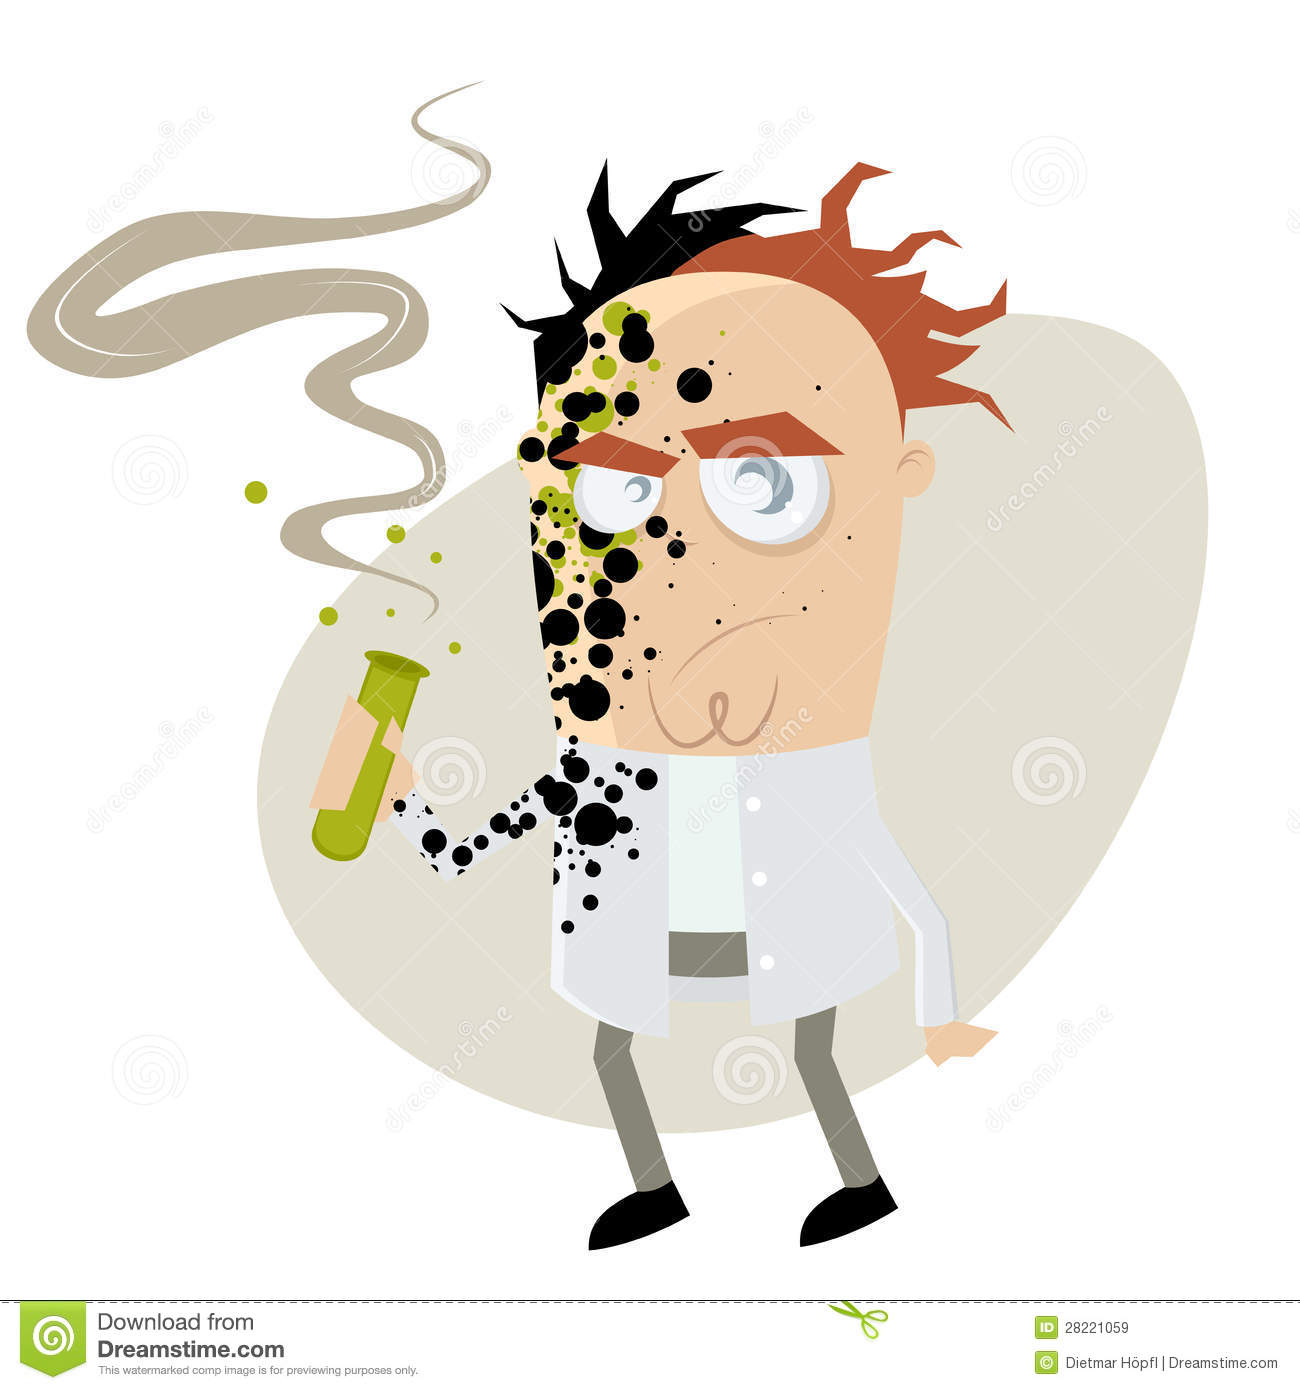 Funny Cartoon Illustration Of A Scientist Who Had An Accident